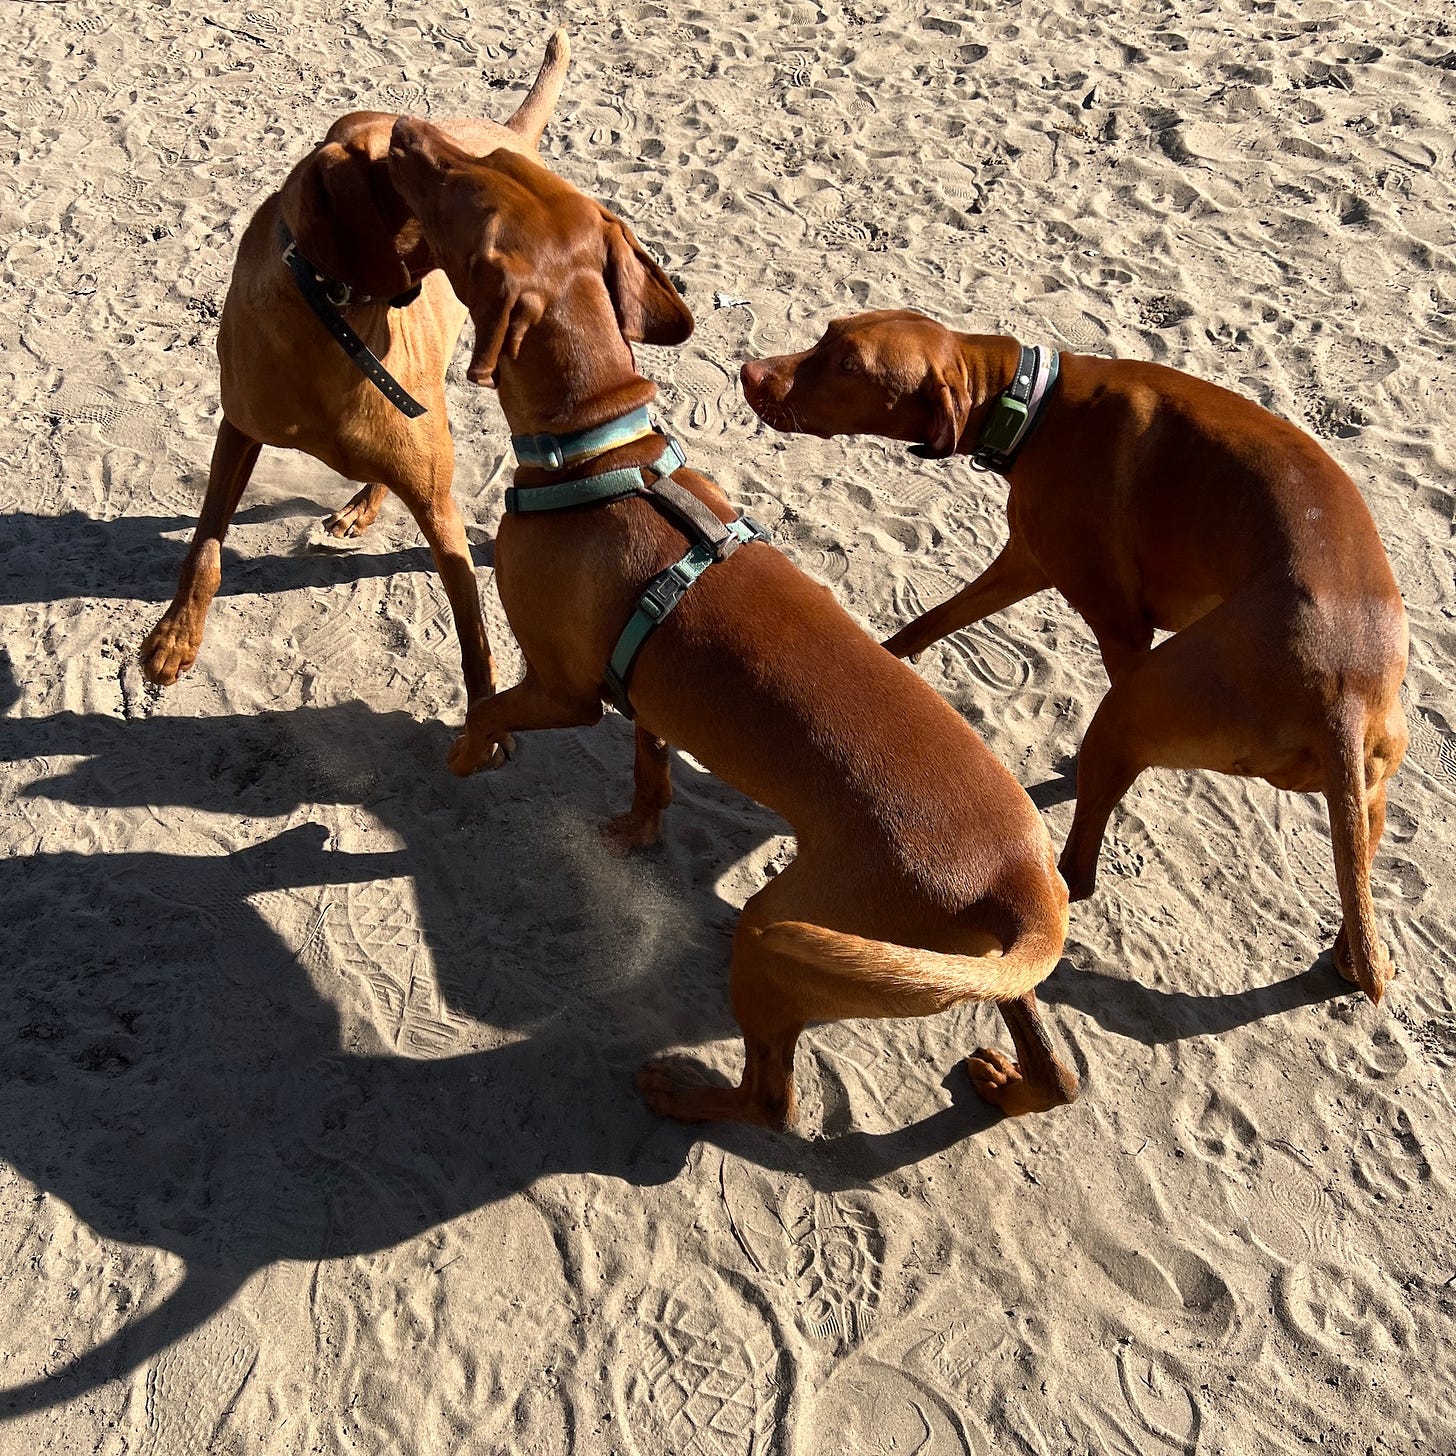 Three vizsla dogs playing in the sand.